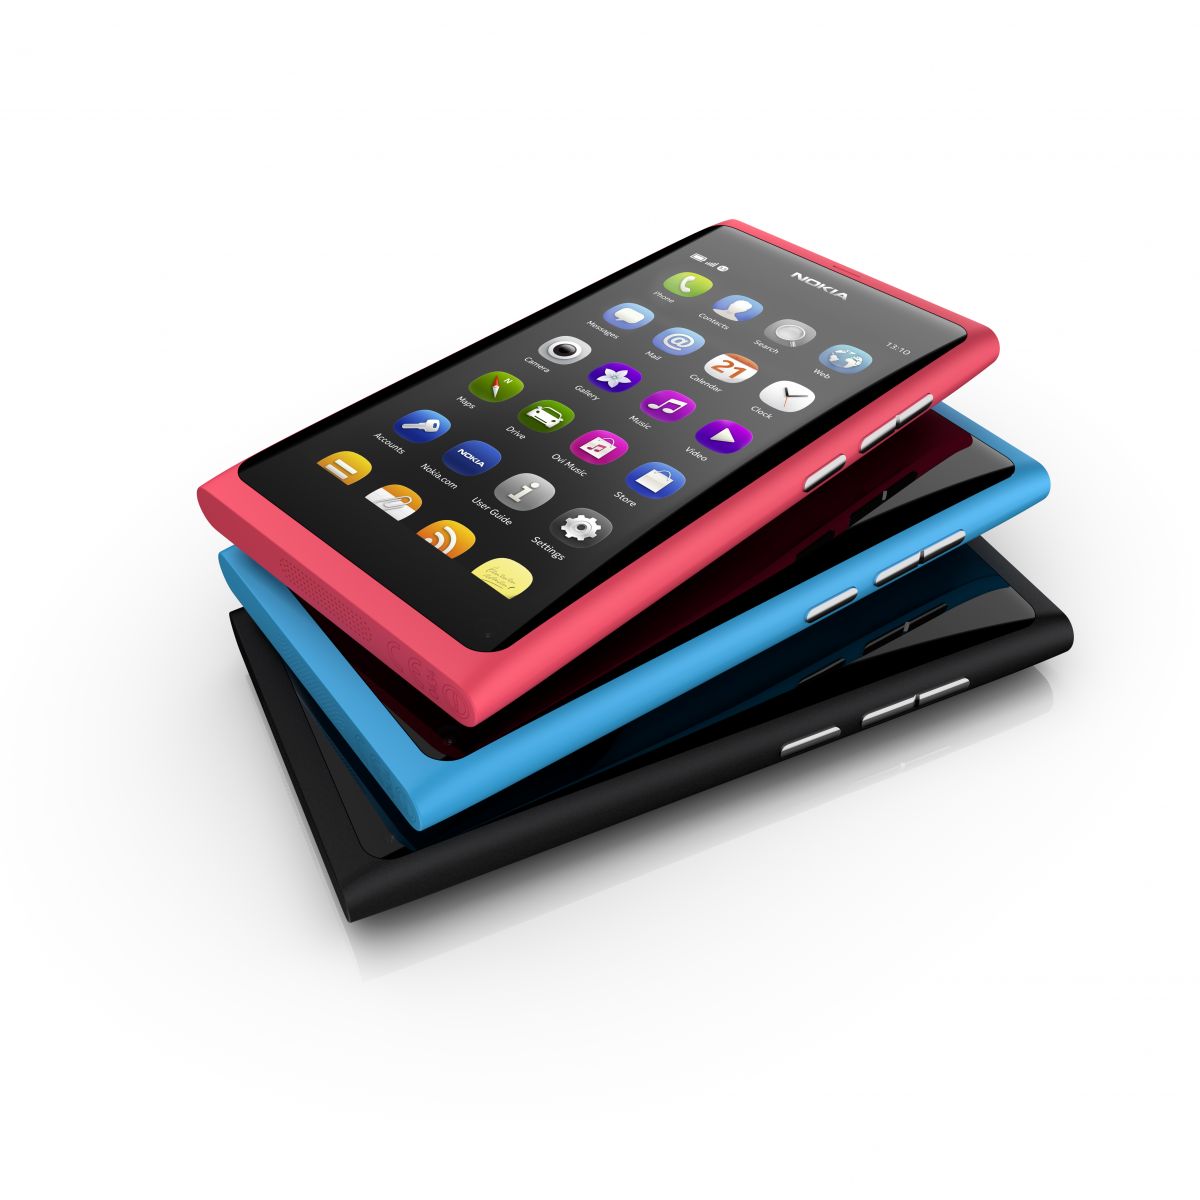 Nokia N9 is Now Up for Pre-order in the Philippines at Smart